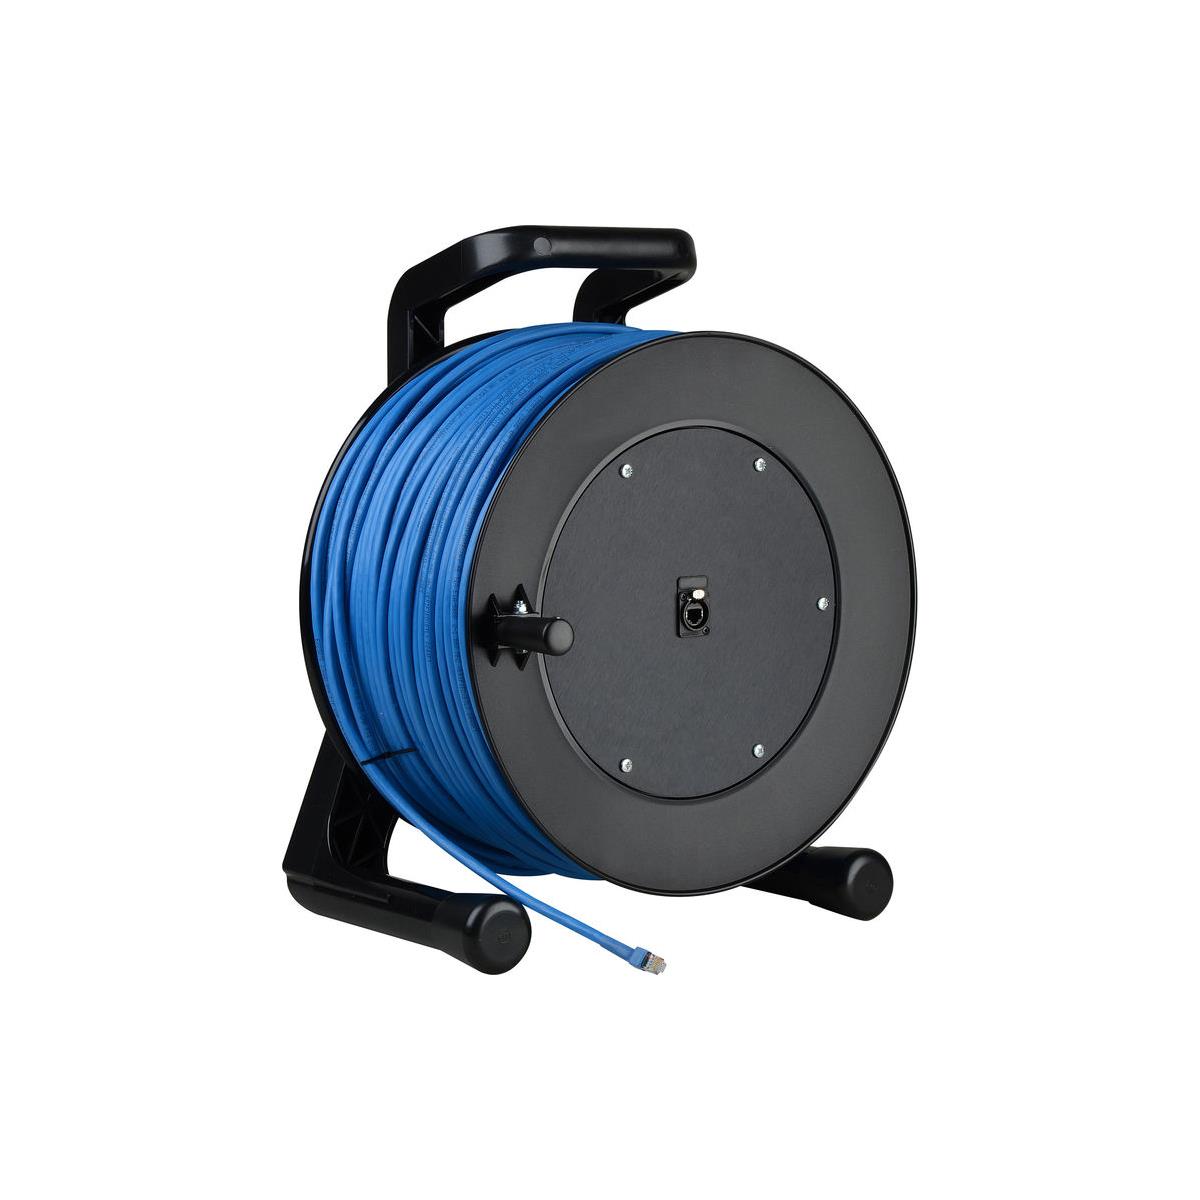 Image of Laird ProReel 328' CAT6 Integrated Cable Reel with Built-In RJ45 Jack in Hub